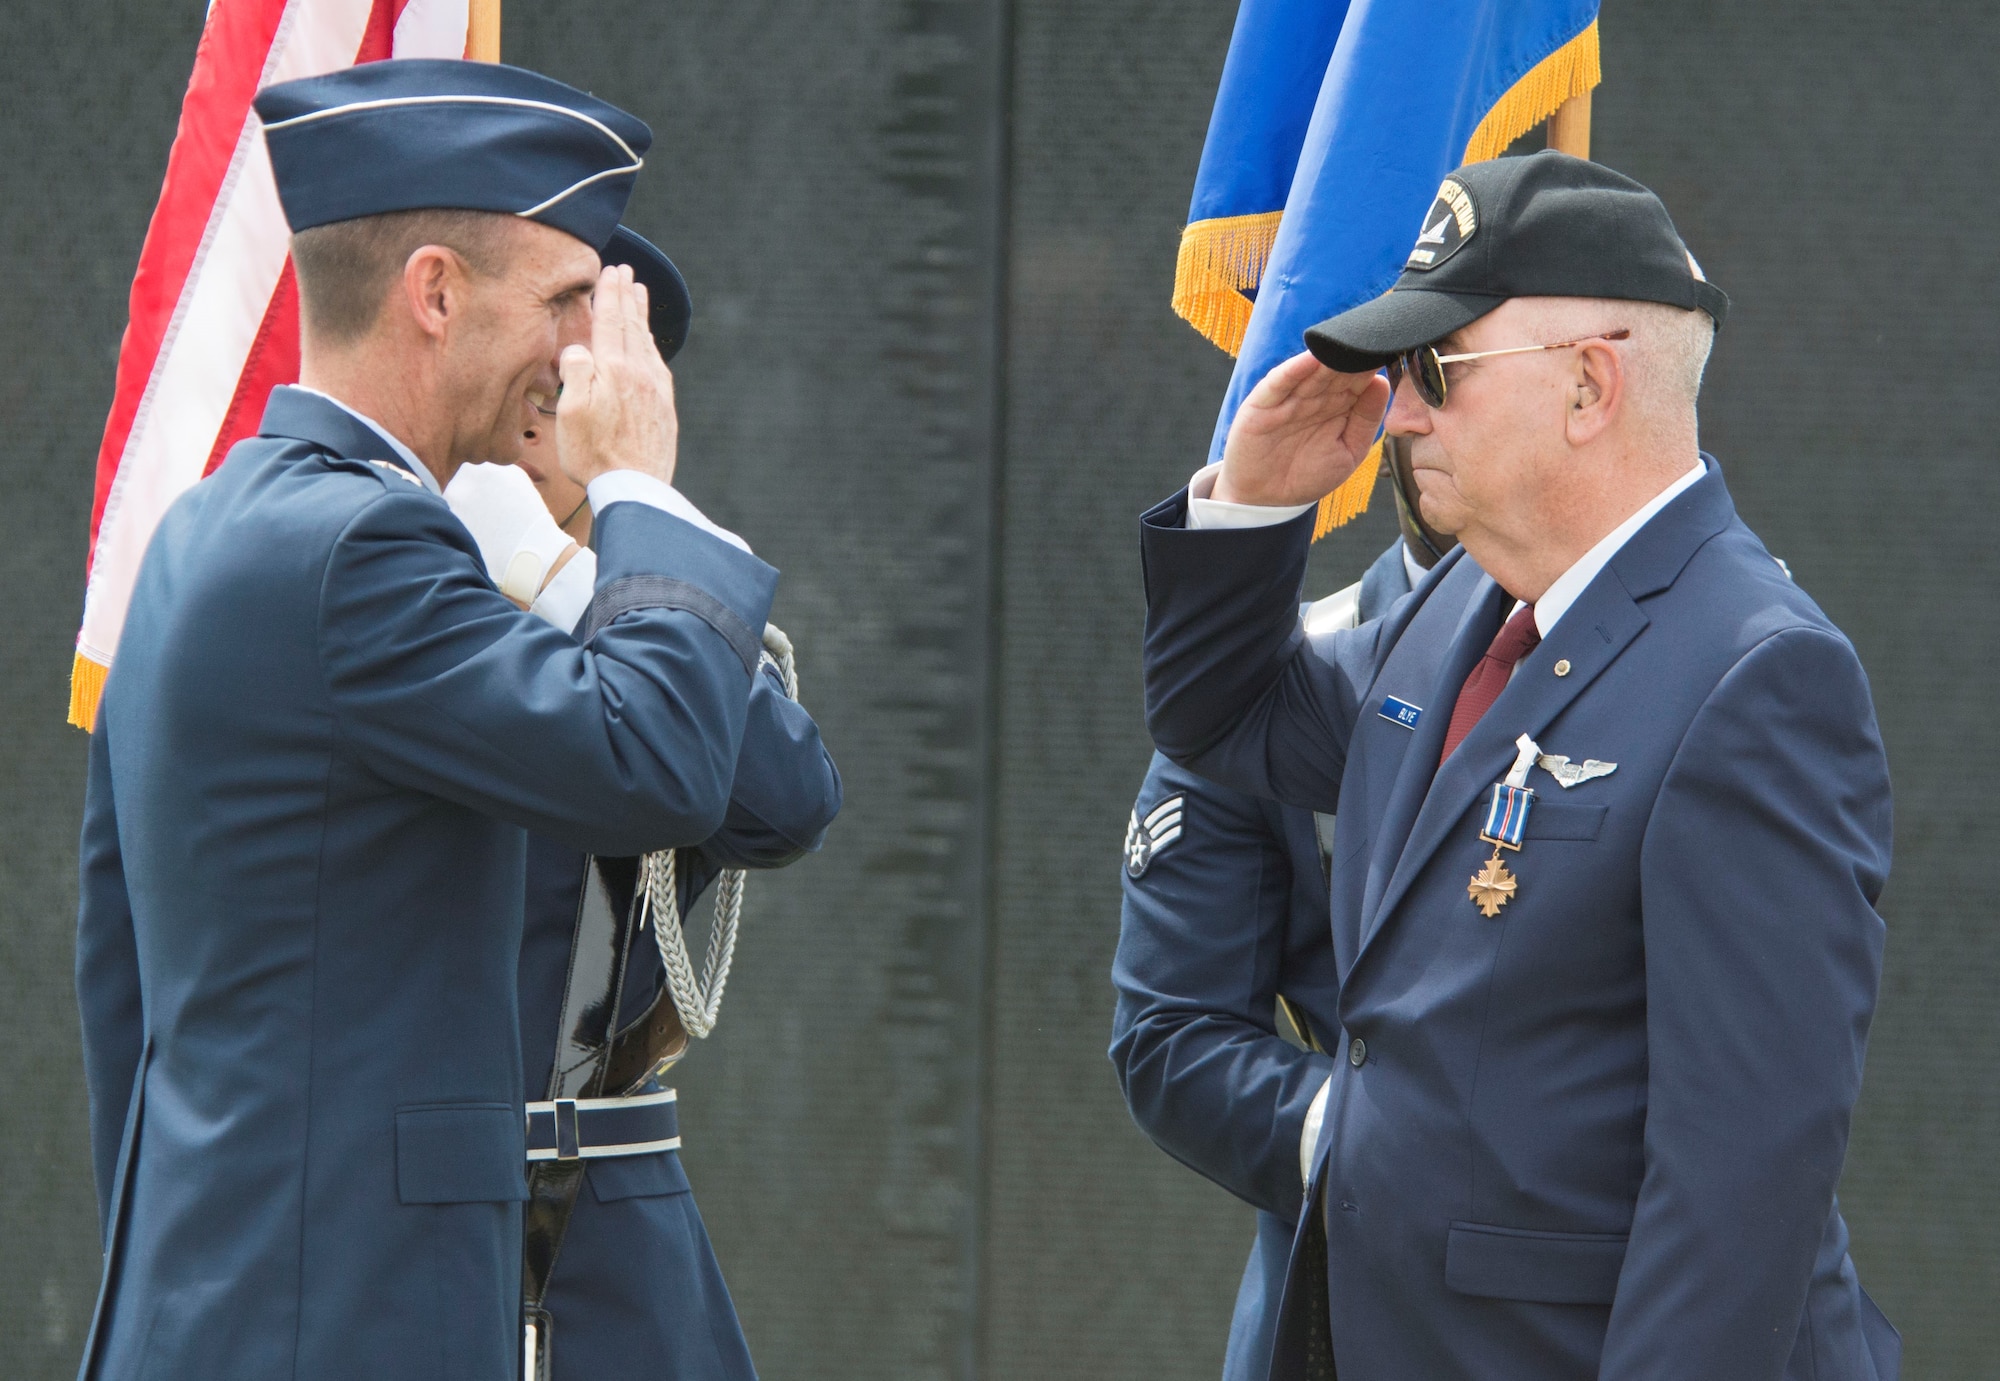 U.S. Air Force Maj. Gen. Scott Zobrist, 9th Air Force commander, returns a salute from retired Capt. Johnny Blye at The Wall That Heals in Camden, S.C., May 5, 2018.